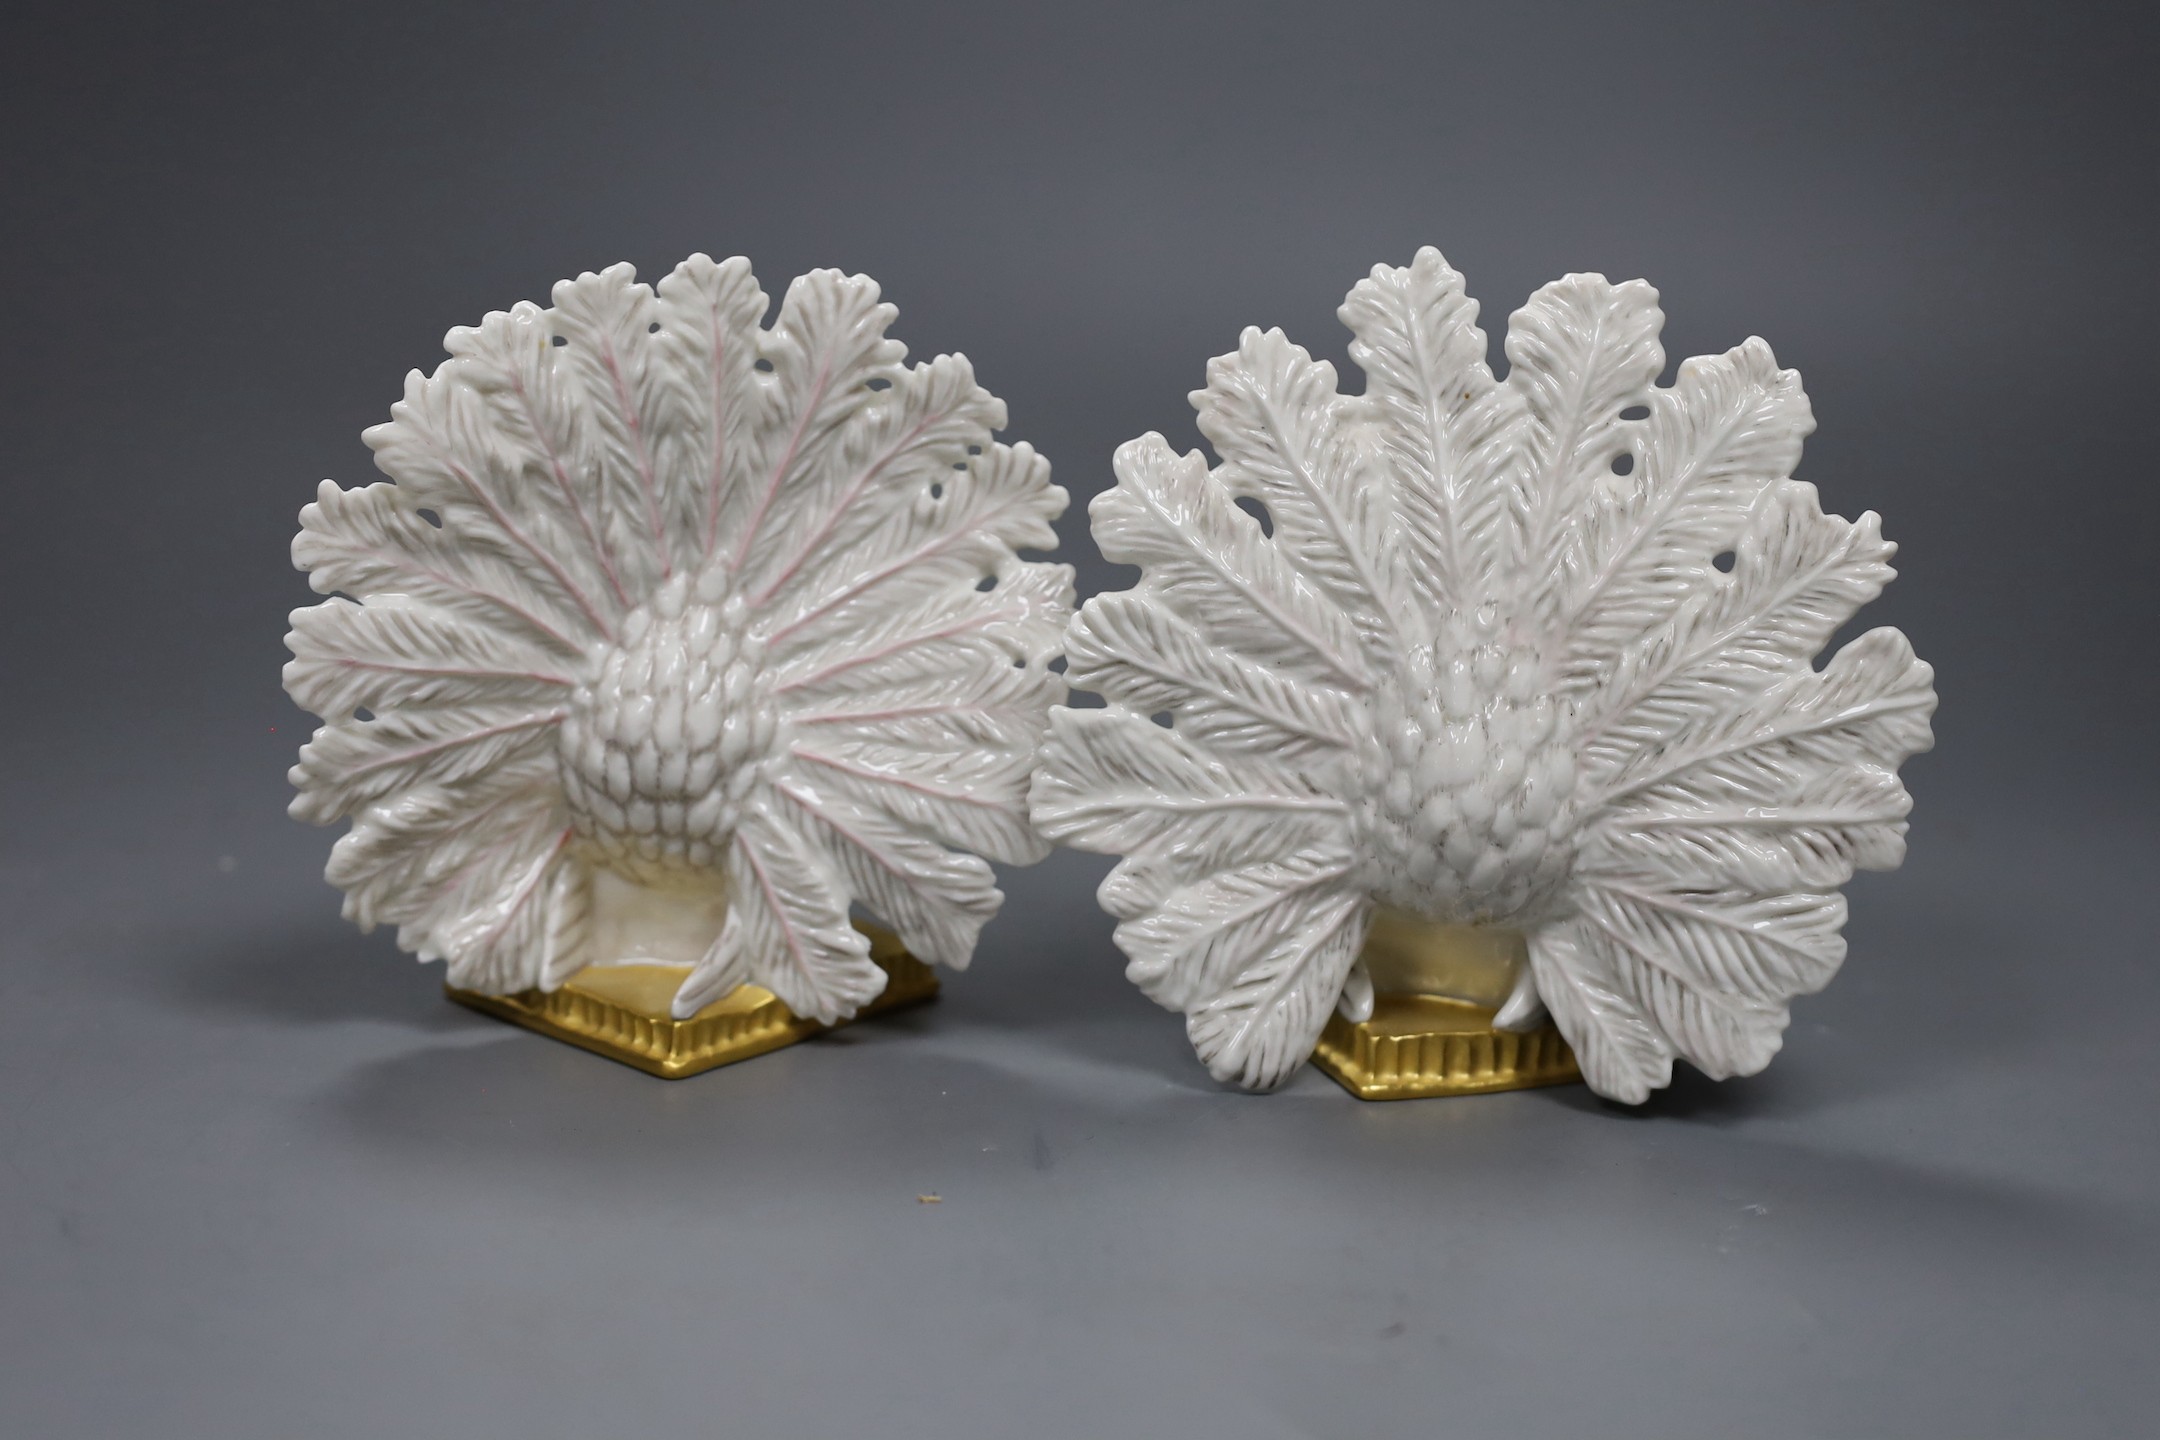 A pair of Nymphenberg porcelain figures of peacock tailed doves, 13cm tall